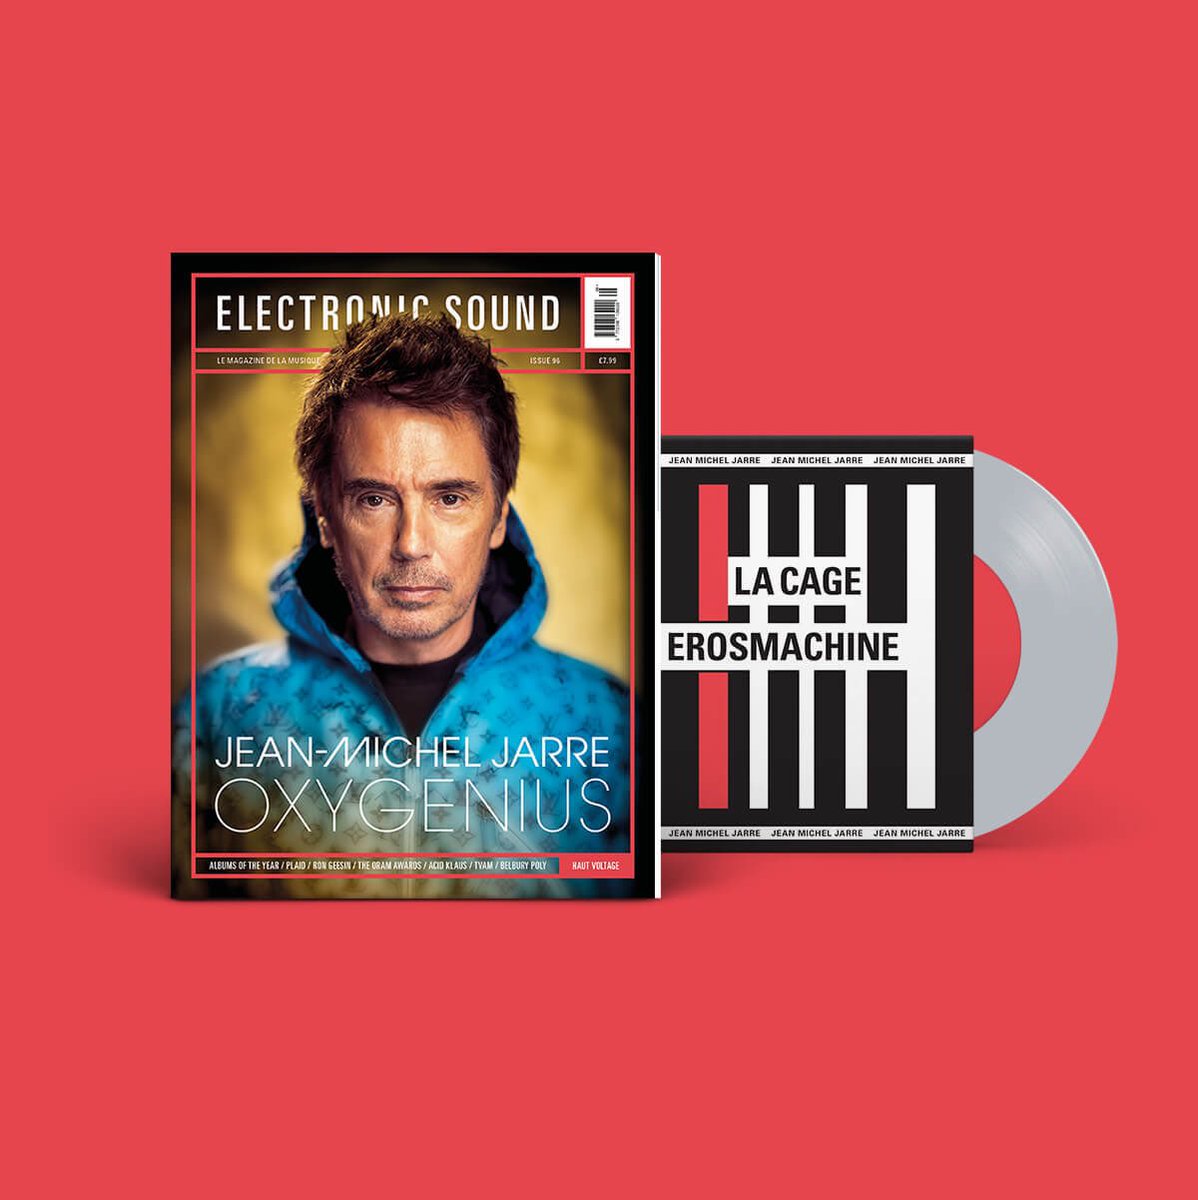 OUT NOW... ELECTRONIC SOUND 96 | Jean-Michel Jarre: Oxygenius Subscribe at electronicsound.co.uk/subscribe

#jeanmicheljarre #electronicsound #oxygenius